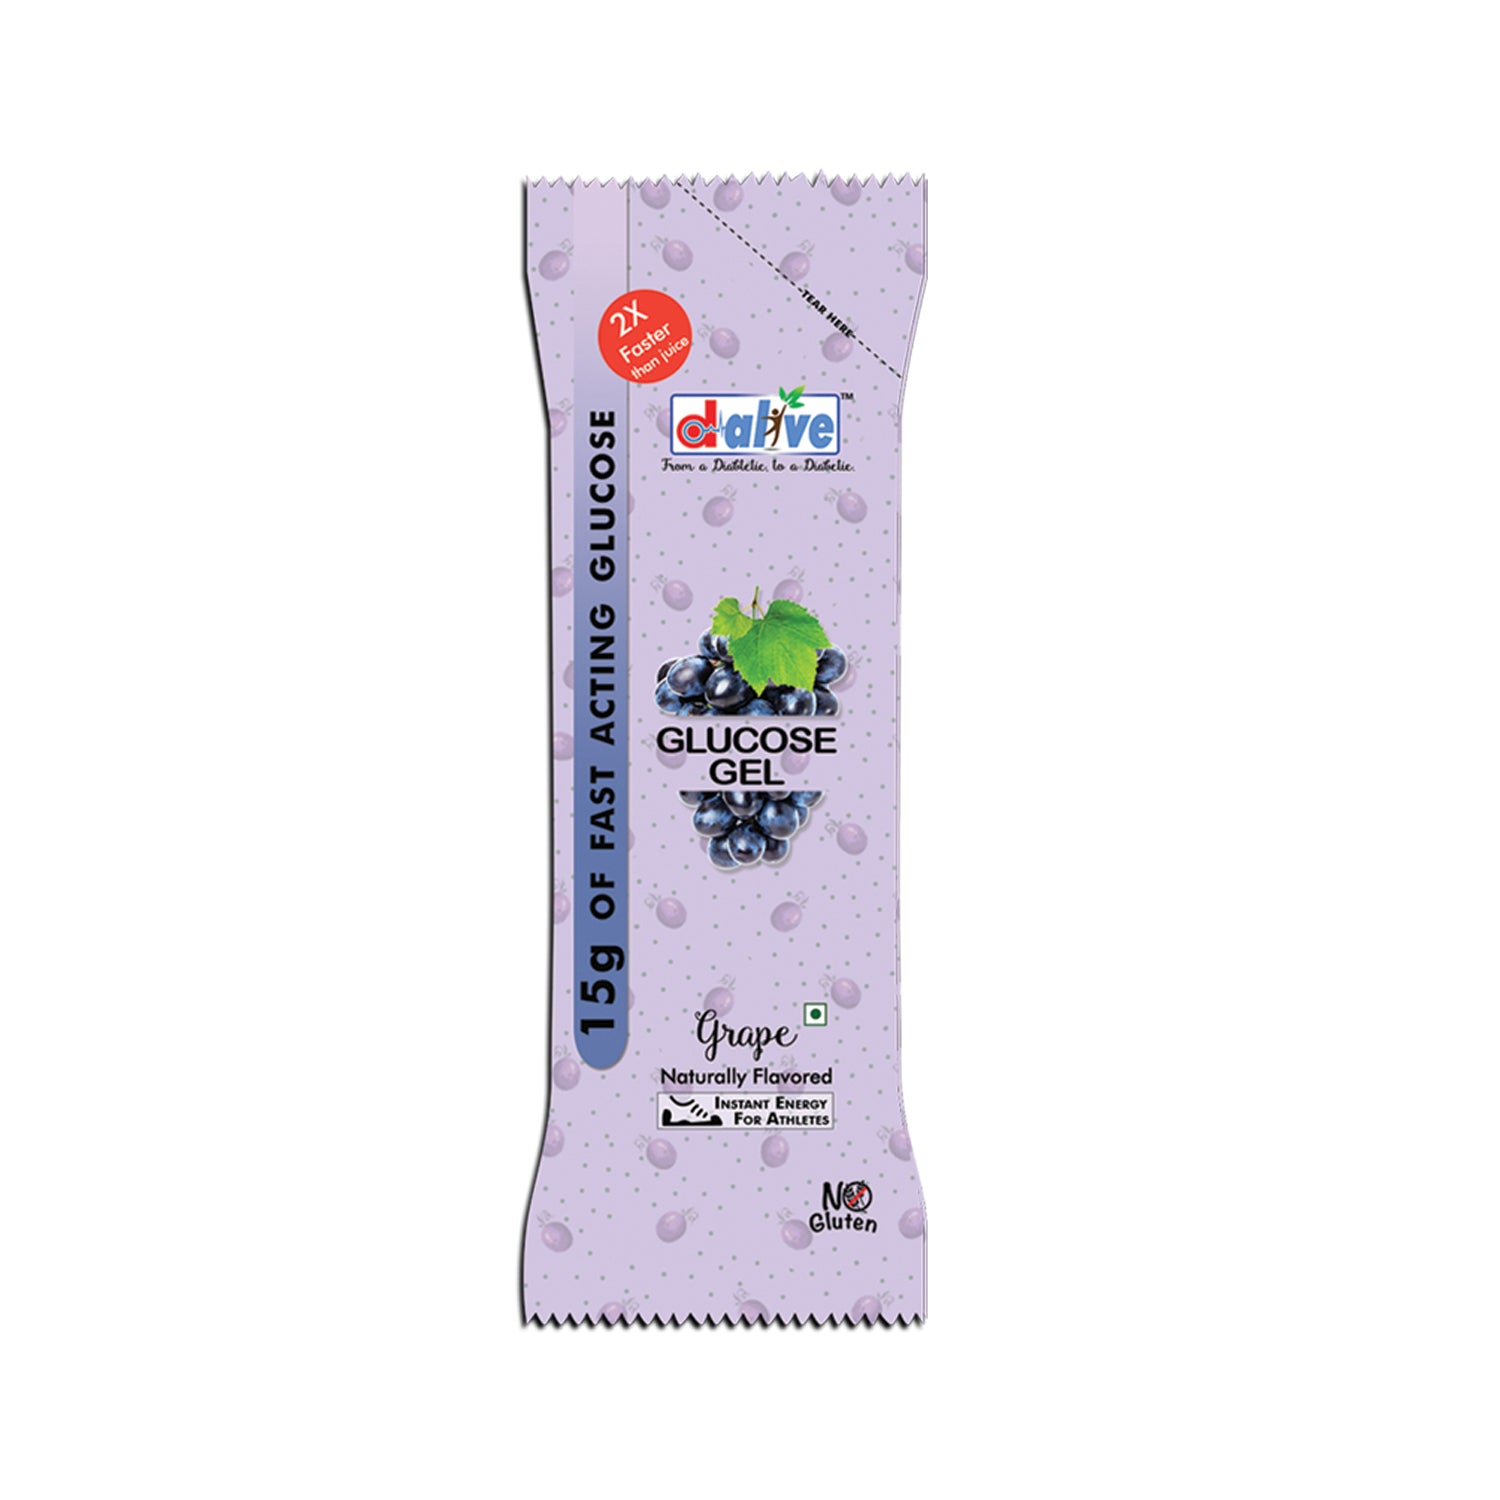 D-Alive 15g of Fast Acting Glucose Gel for treating Hypoglycaemia - Instant Energy Total 3 Pocket Size Sachet: 30g Each